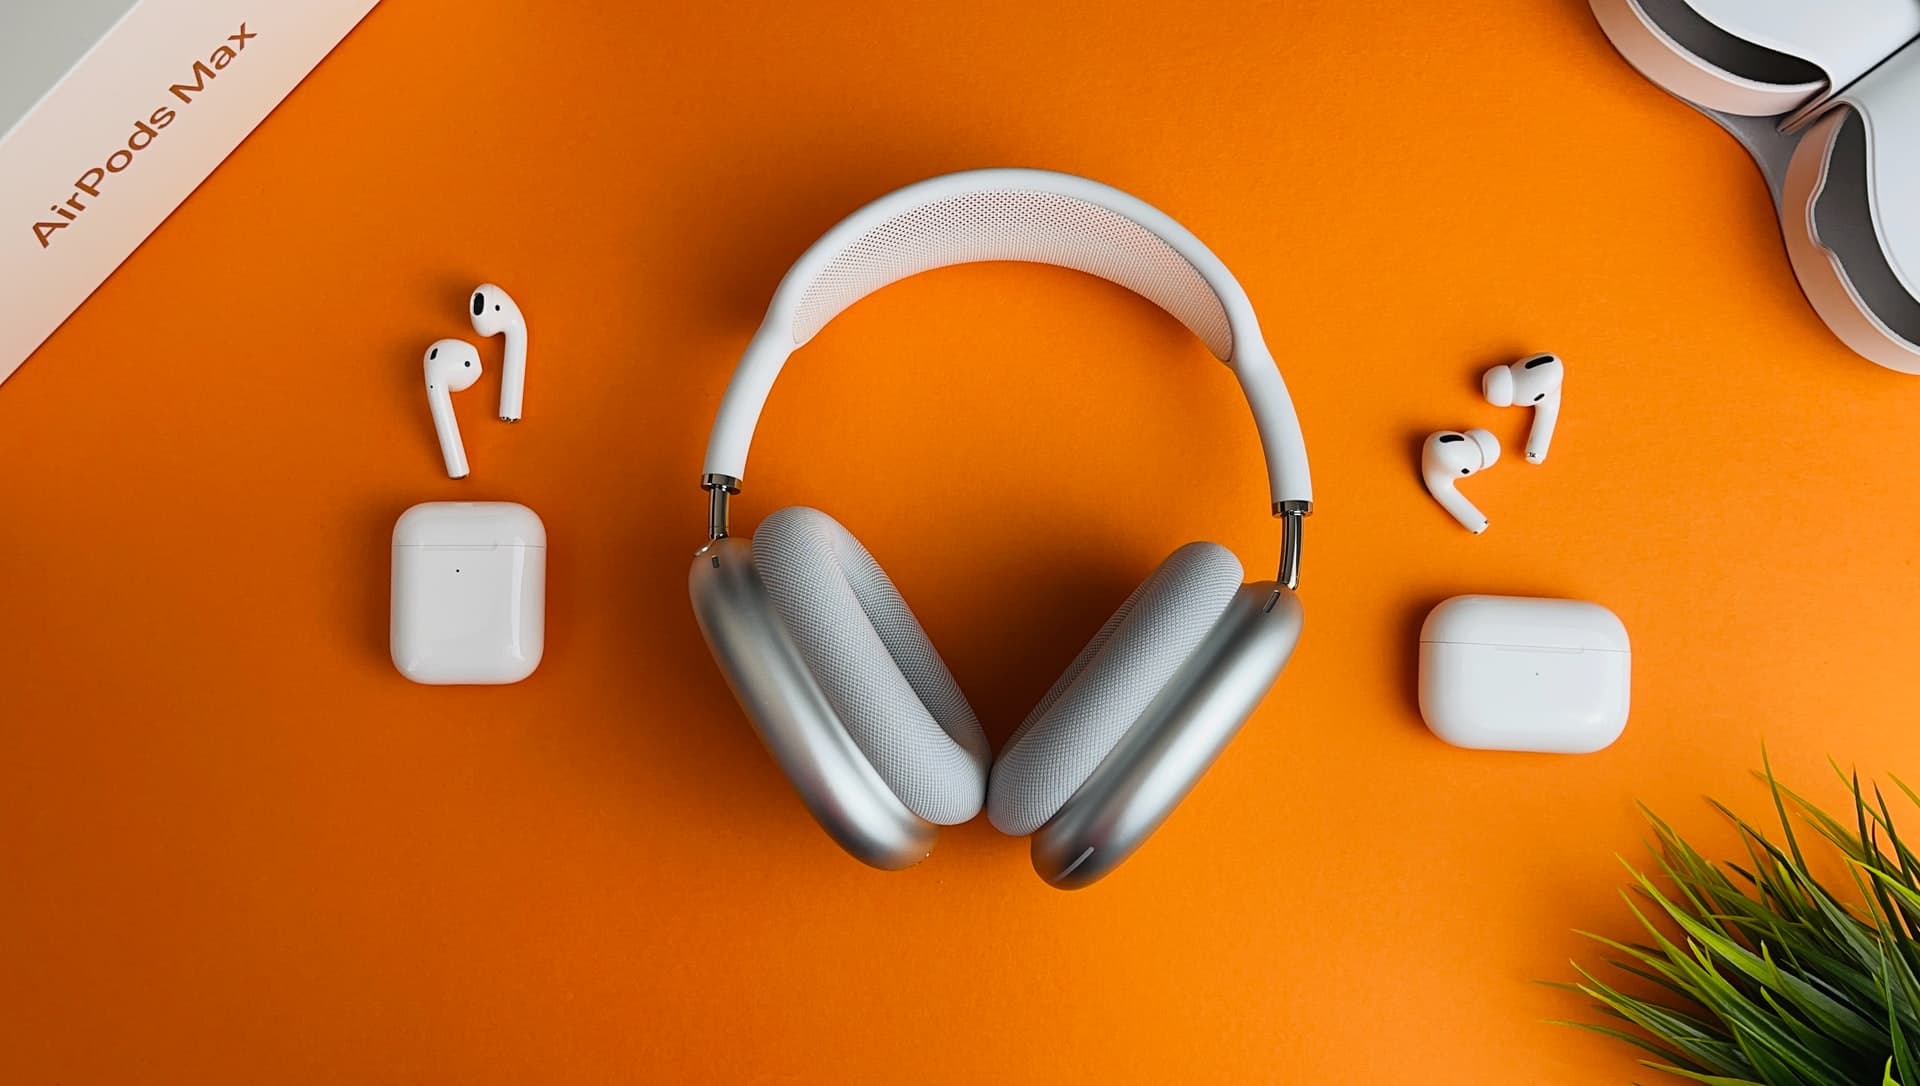 AirPods, AirPods Pro, and AirPods Max kept on an orange table